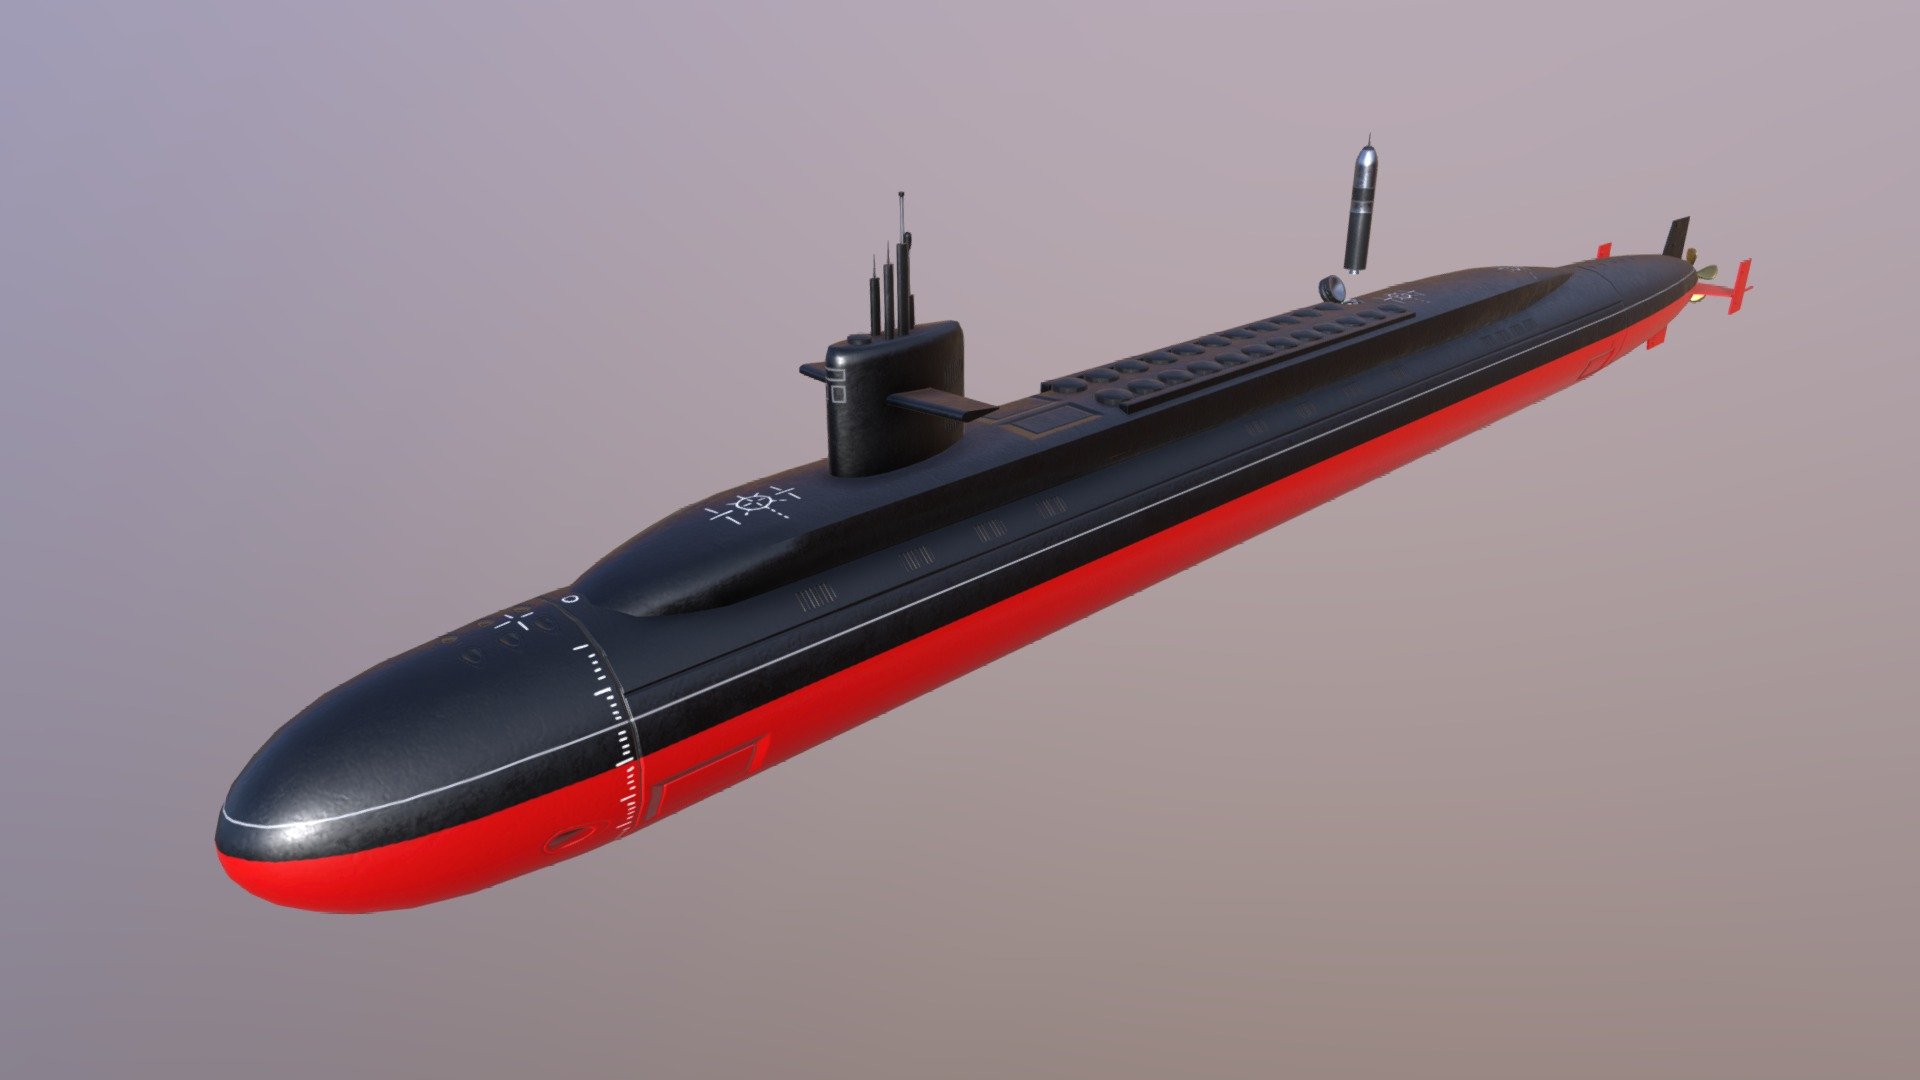 hayuuu this is the tohio class ballistic missile submarine

carrying a ton of trident missiles!

have fun with it!!! - Ohio Class Submarine SSBN - Download Free 3D model by waelXcm 3d model